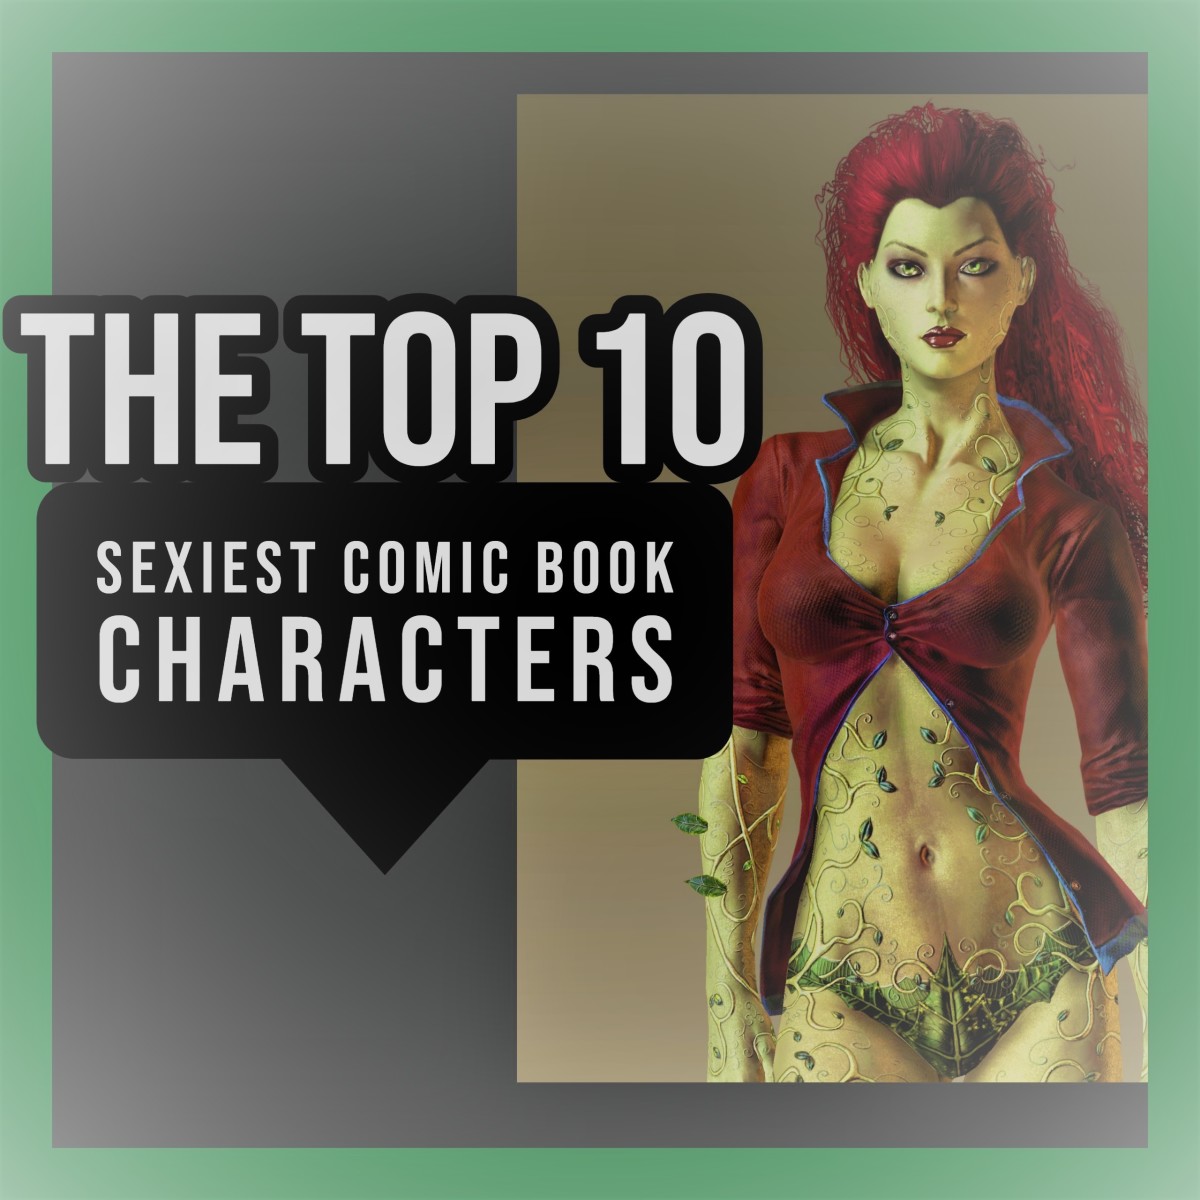 The Top 10 Sexiest Comic Book Characters